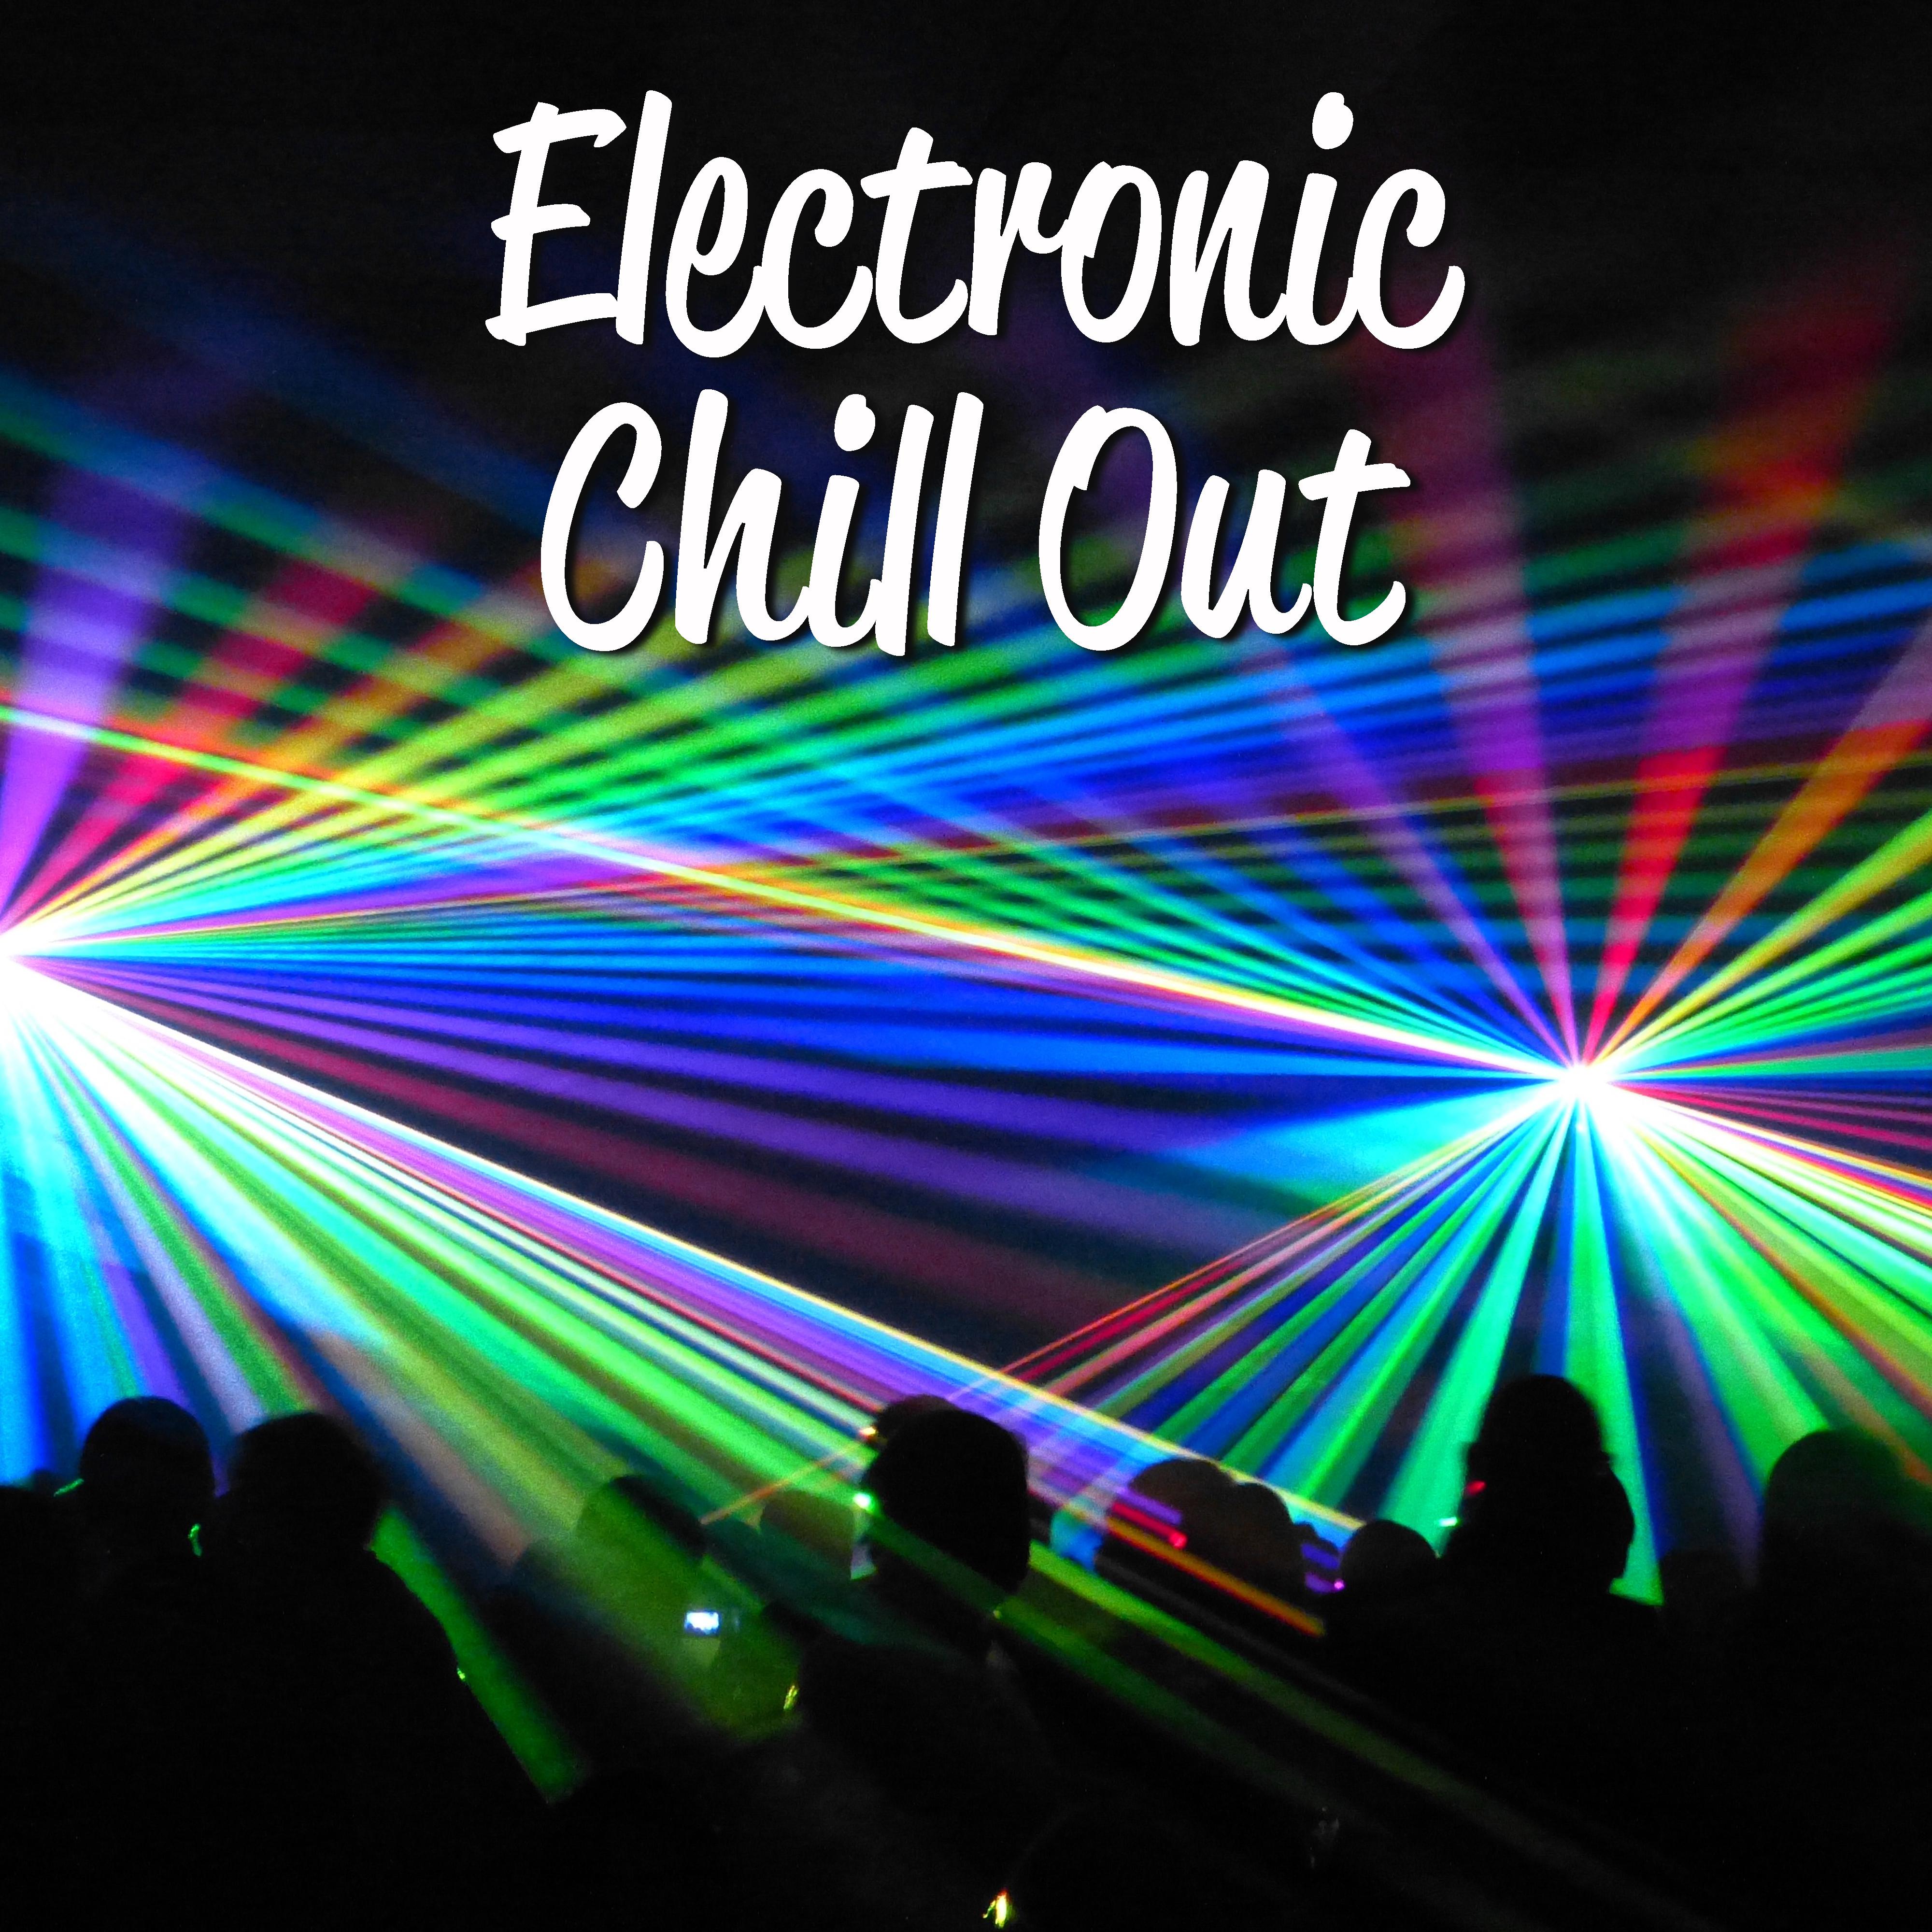 Electronic Chill Out – Dance Party, Ibiza Summertime, Sensual Dance, **** Vibes, Summer Hits 2017, Beach Party, Dancefloor